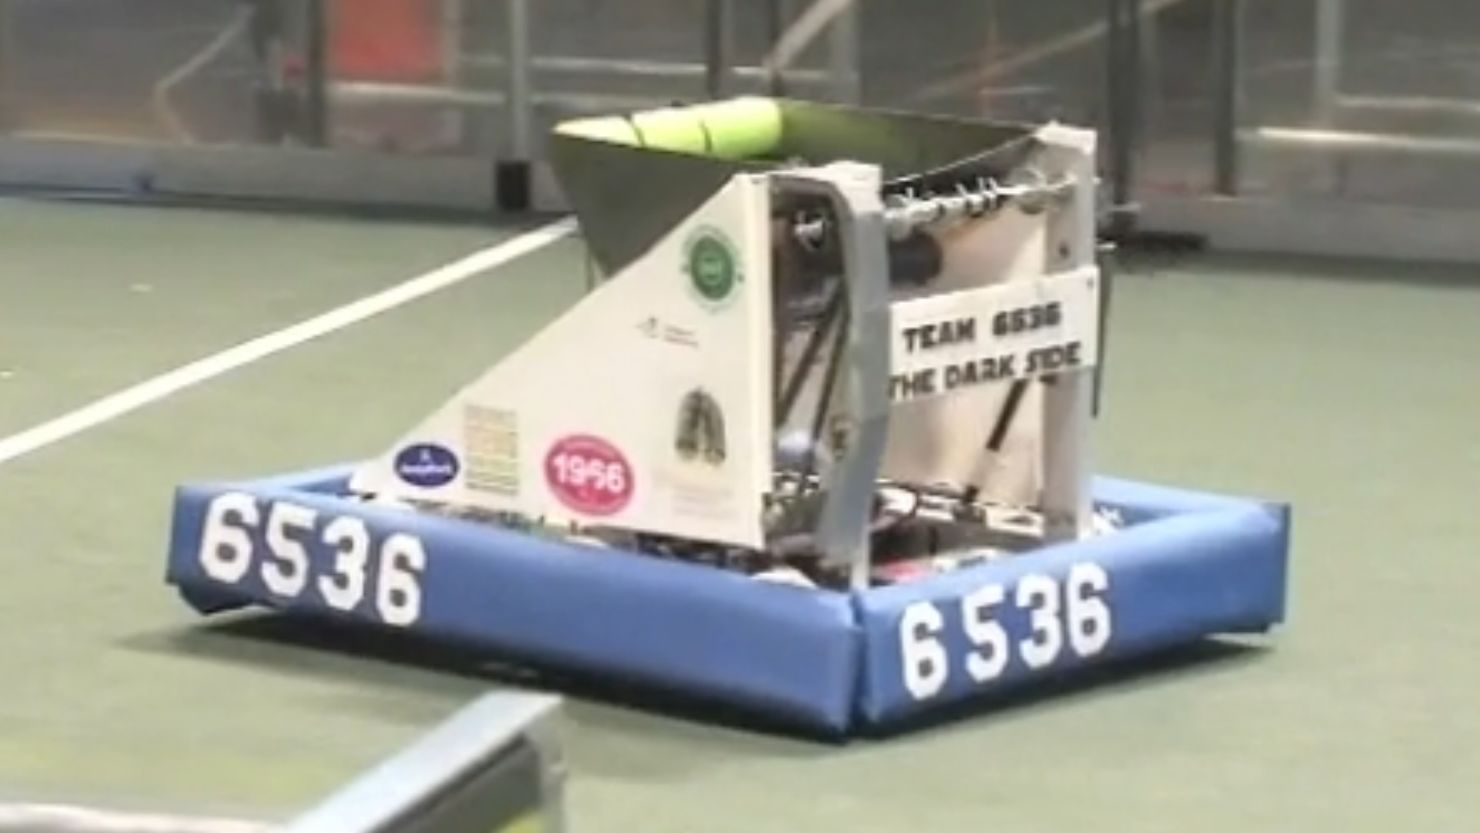 The Dark Side robot is steered by one of two students with sight on the team.